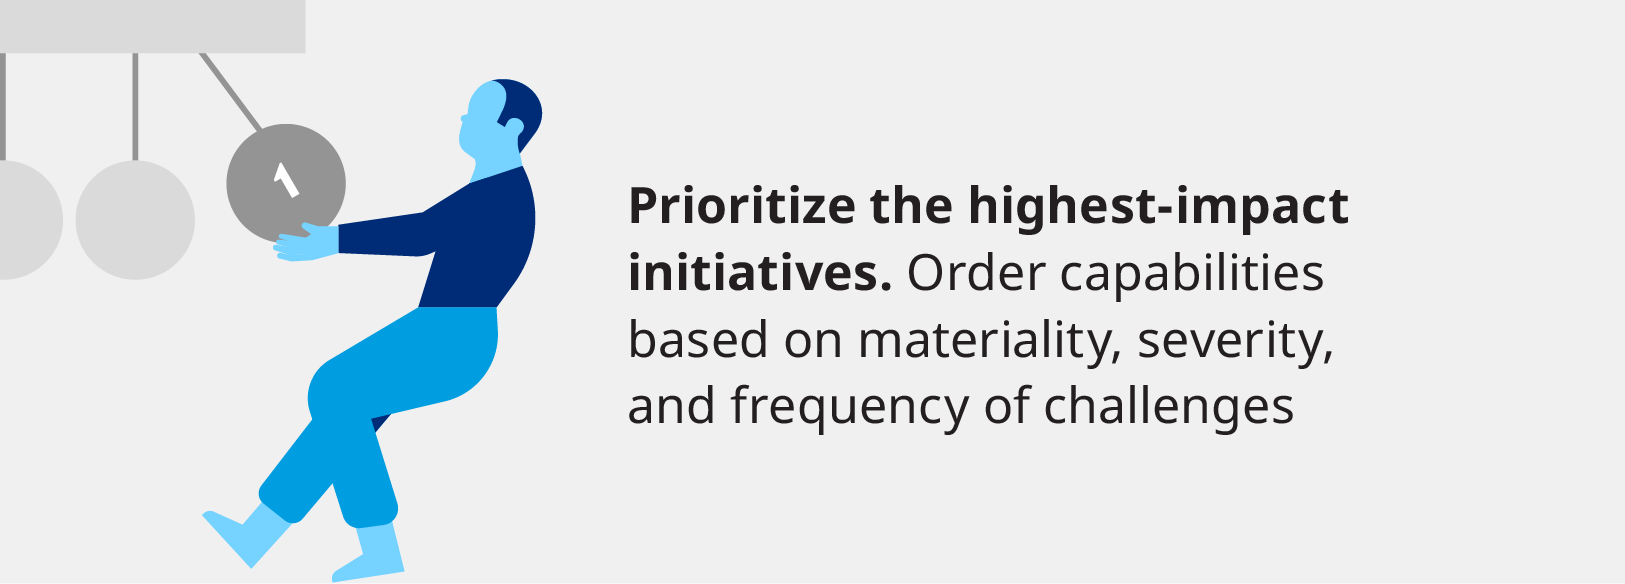 Prioritize the highest impact initiatives. Order capabilities based on materiality, severity, and frequency of challenges.